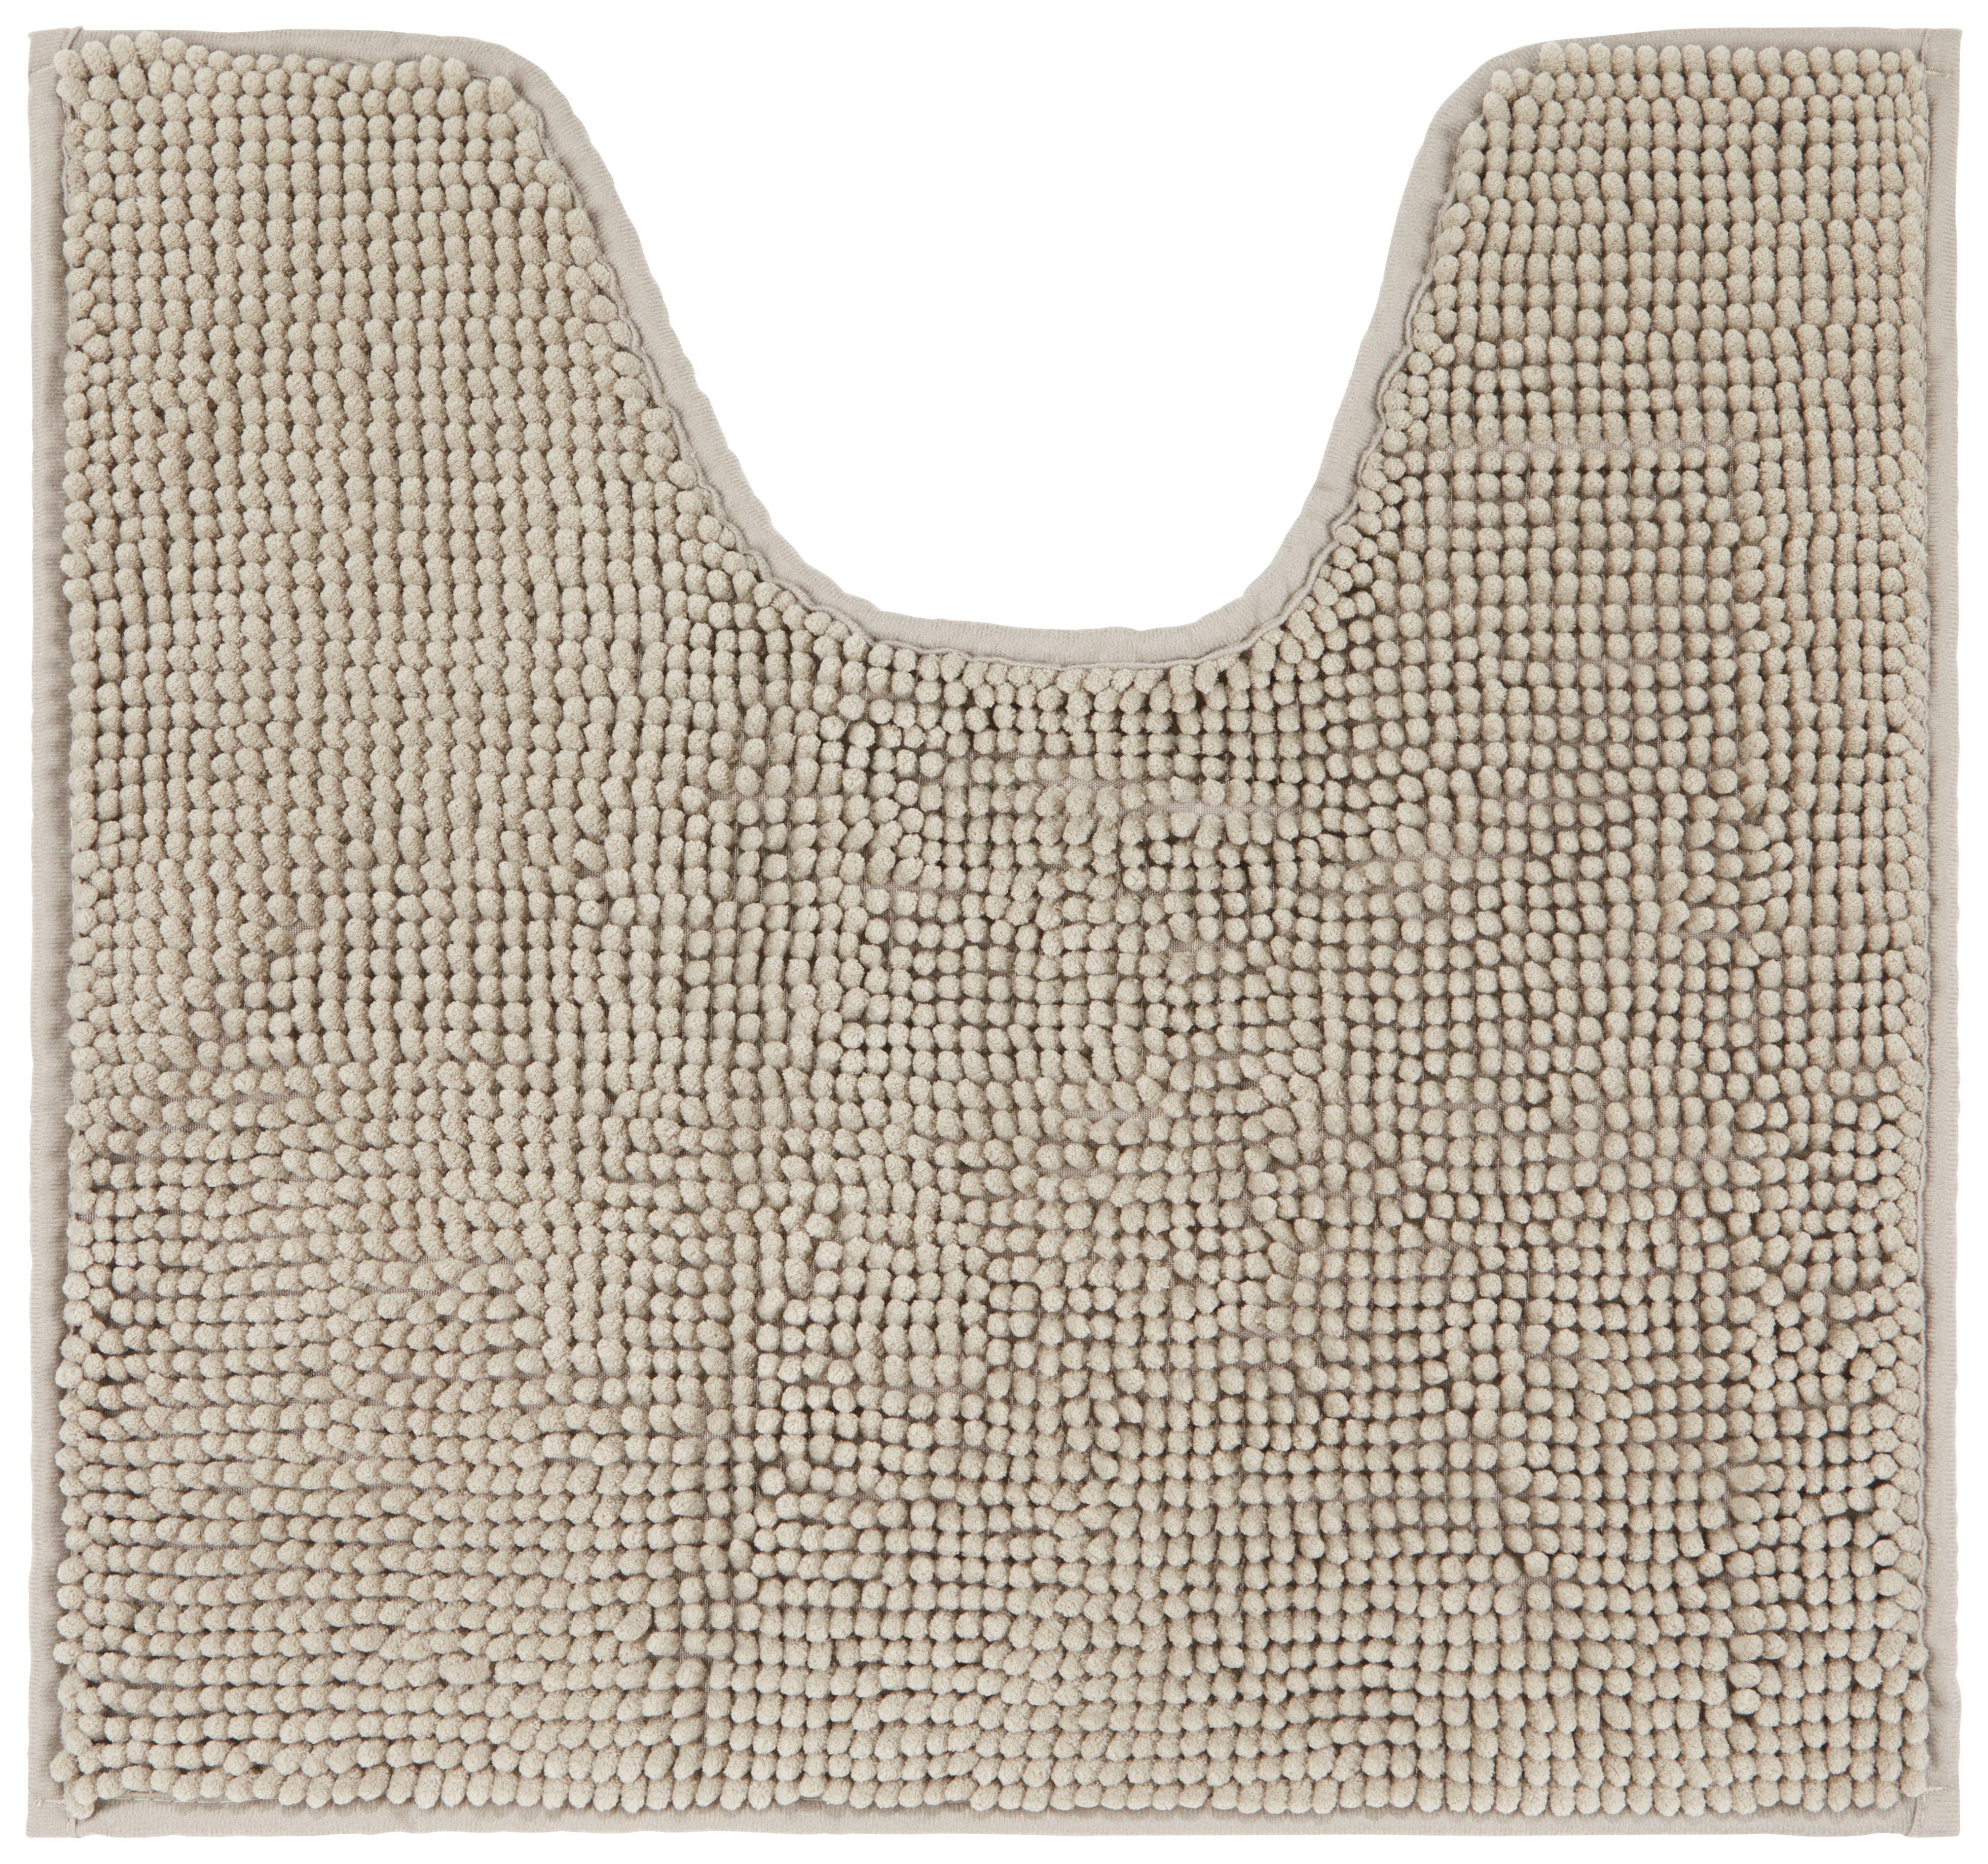 WC-Vorleger Nelly in Taupe ca. 50x50cm - Taupe, Textil (50/50cm) - Modern Living